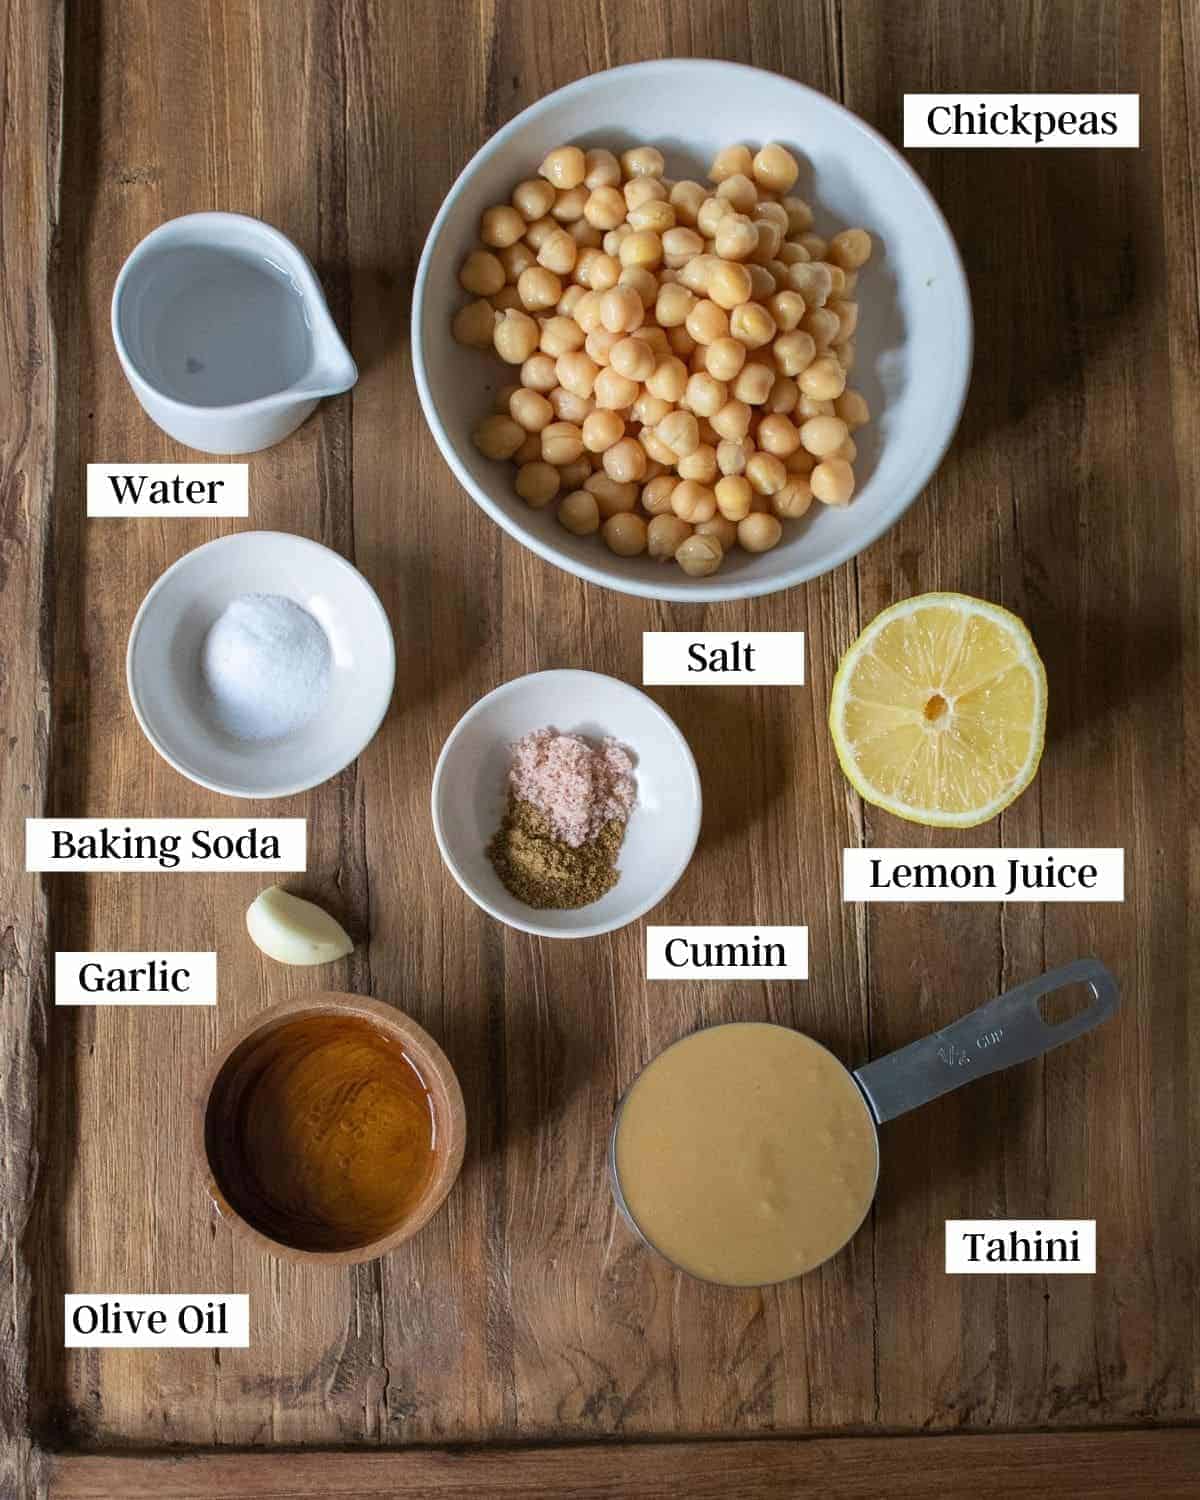 Ingredients for hummus laid out on a table